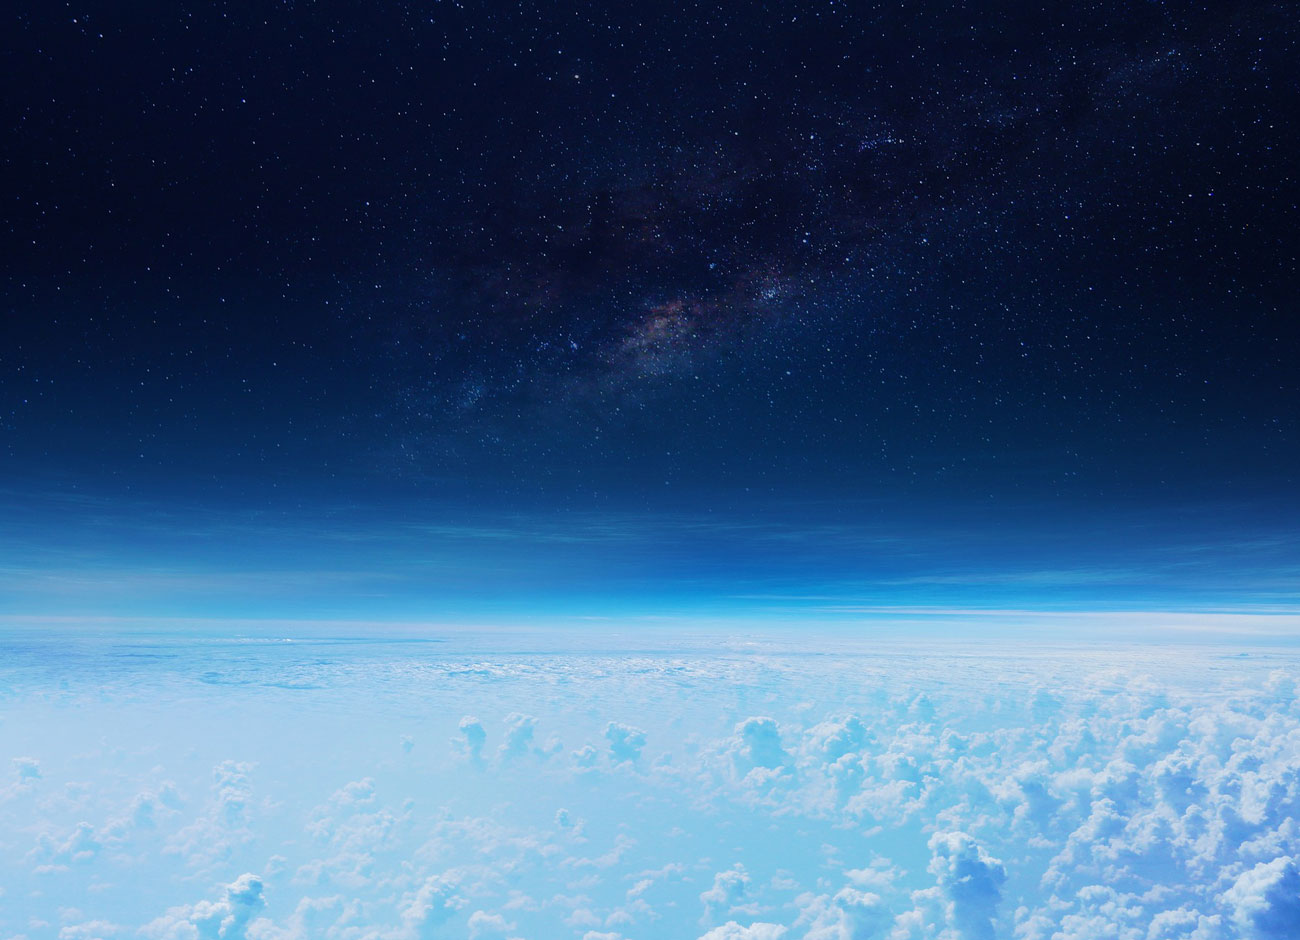 a view of the stratosphere from space. Clouds below, a hazy blue line and then the darkness of space with stars.